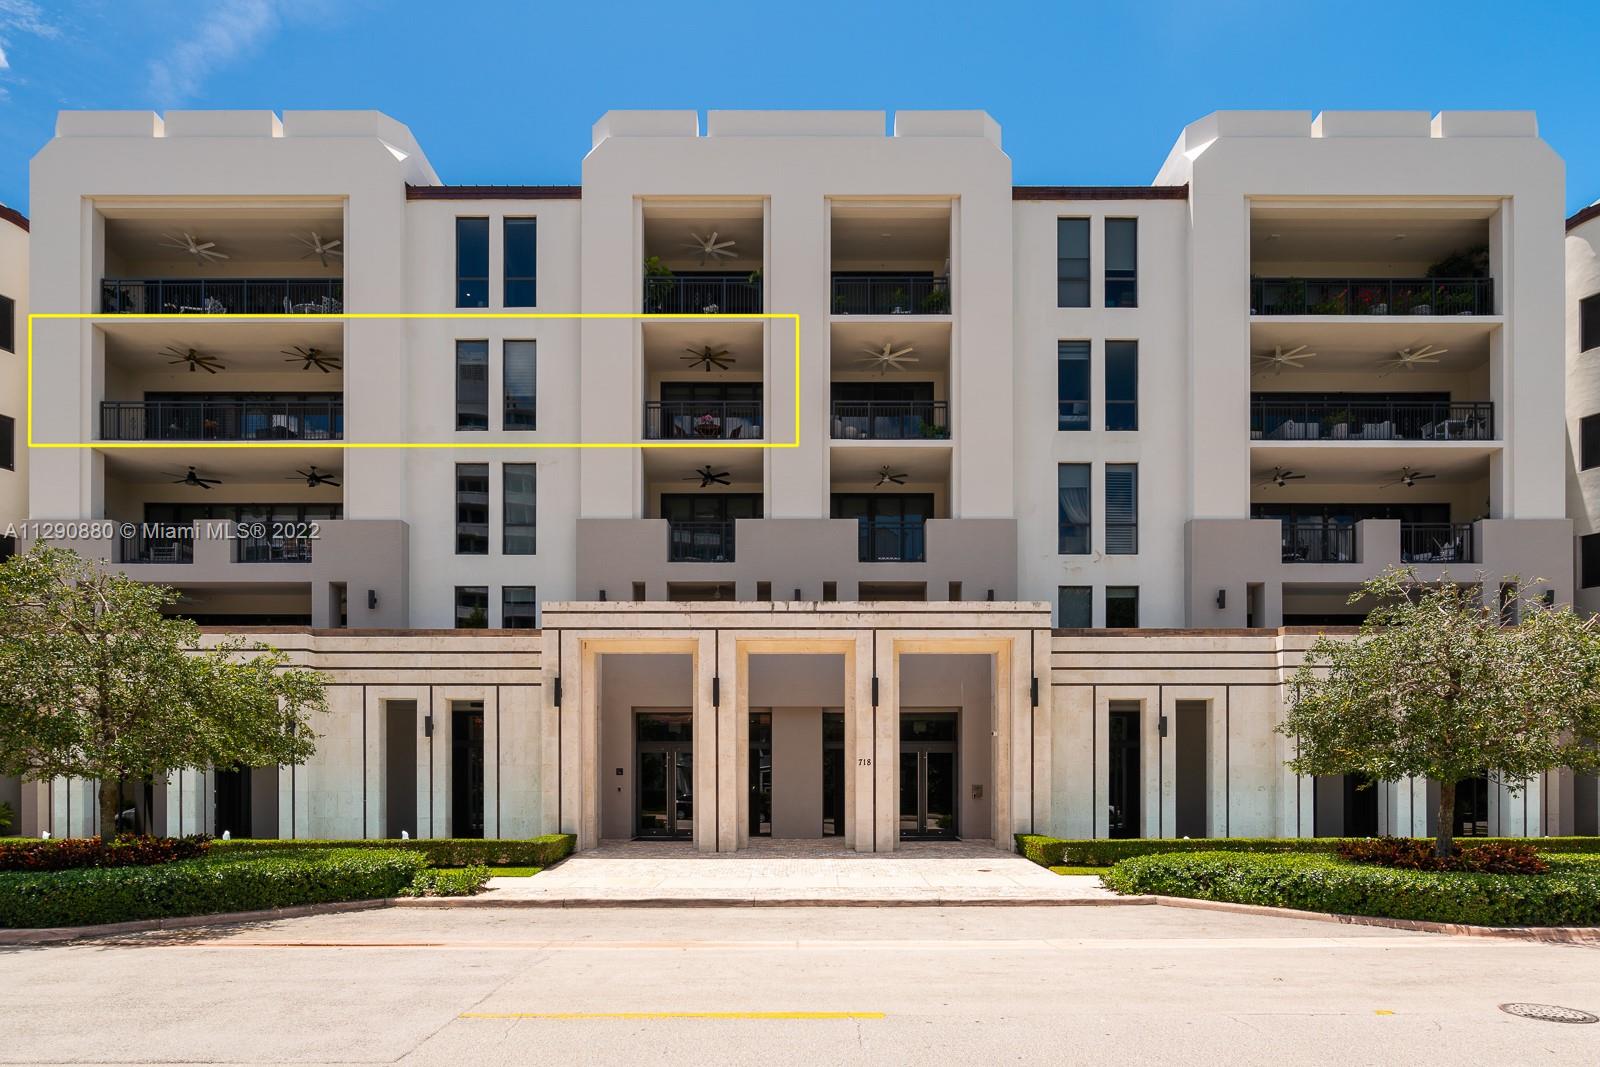 One of the Newest Buildings in Coral Gables, Biltmore Parc has become the most respected preeminent boutique Luxury Condominium with 24/7 concierge service & only 32 units! The private elevator opens into your foyer & you see the high ceilings, the open floor plan, the gorgeous floors, the open kitchen with all SS Bosch Appliances with a snack/Bar countertop & the amazing “Nano Doors” that fold to the sides and opens 22’ wide to your exterior terraces. This 2,100SF 2Bdrm/2.5 Bath plus Den/office/Laundryroom with full sized GE Washer/Dryer has a large primary Bdrm 14’ X 17’ with a 13’ X 12’ walk in Closet and the primary Bath 11’ X 12’ that has dbl vanities, large shower and separate Roman tub. This unit is being sold with all Sony TV’s, & 2 parking spaces.